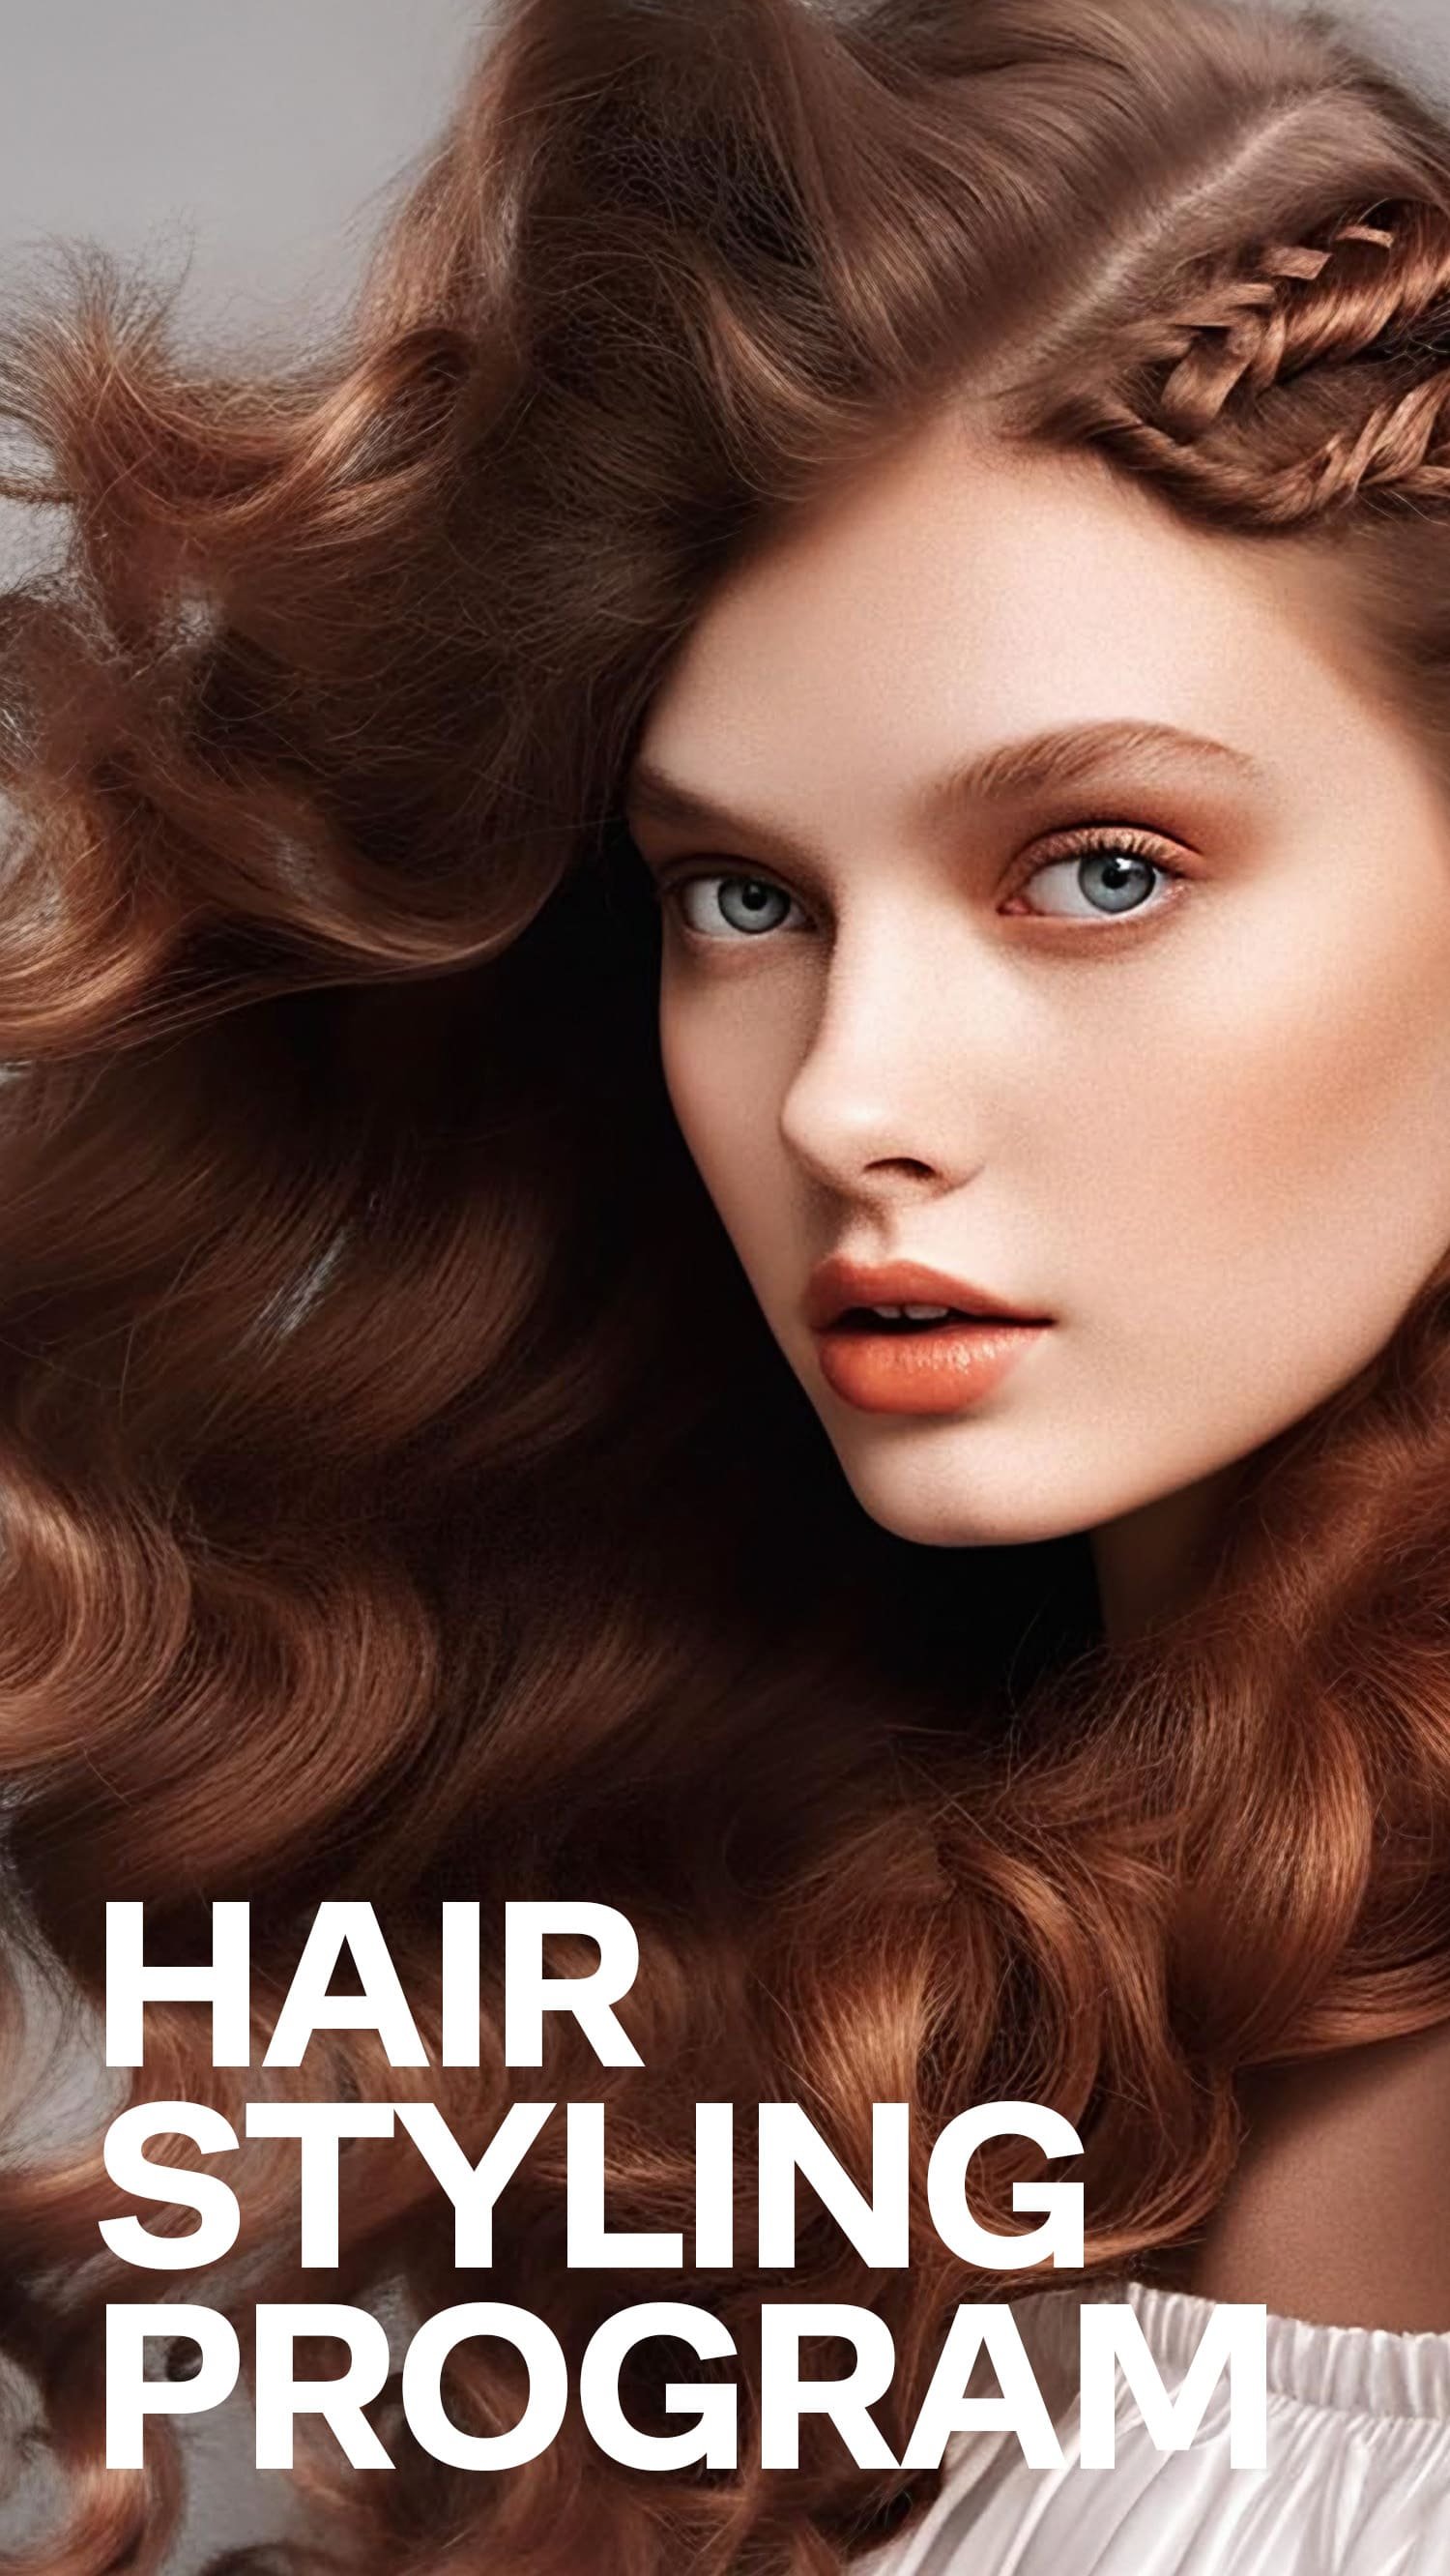 Hair Stylist Training - First Online Hands-On School, Kit is Included